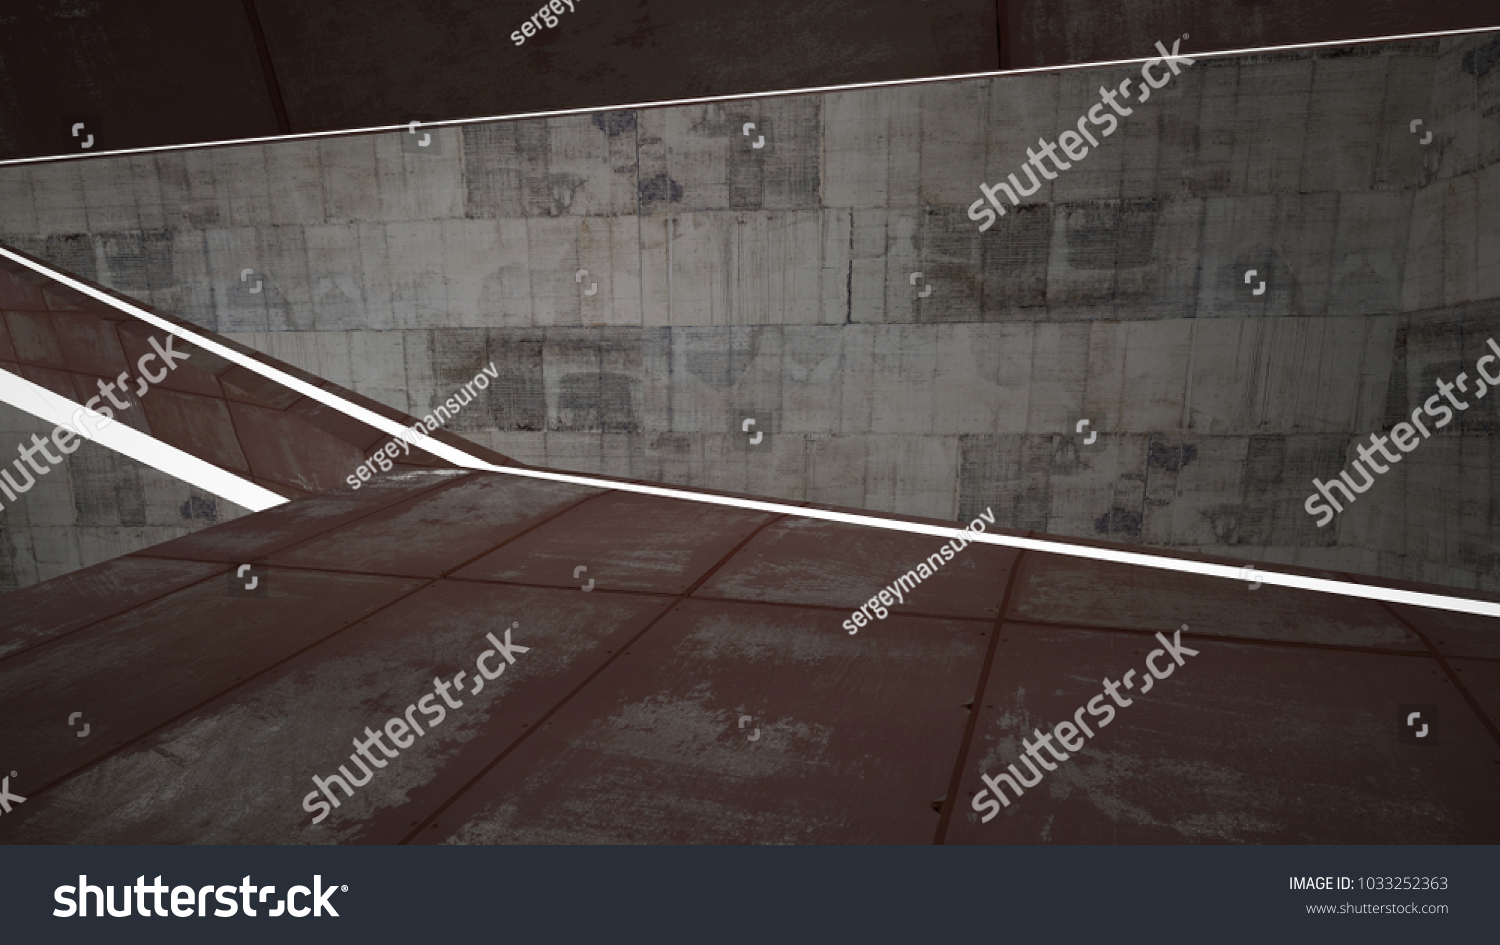 Empty smooth abstract room interior of sheets rusted metal and brown concrete. Architectural background. Night view of the illuminated. 3D illustration and rendering #1033252363